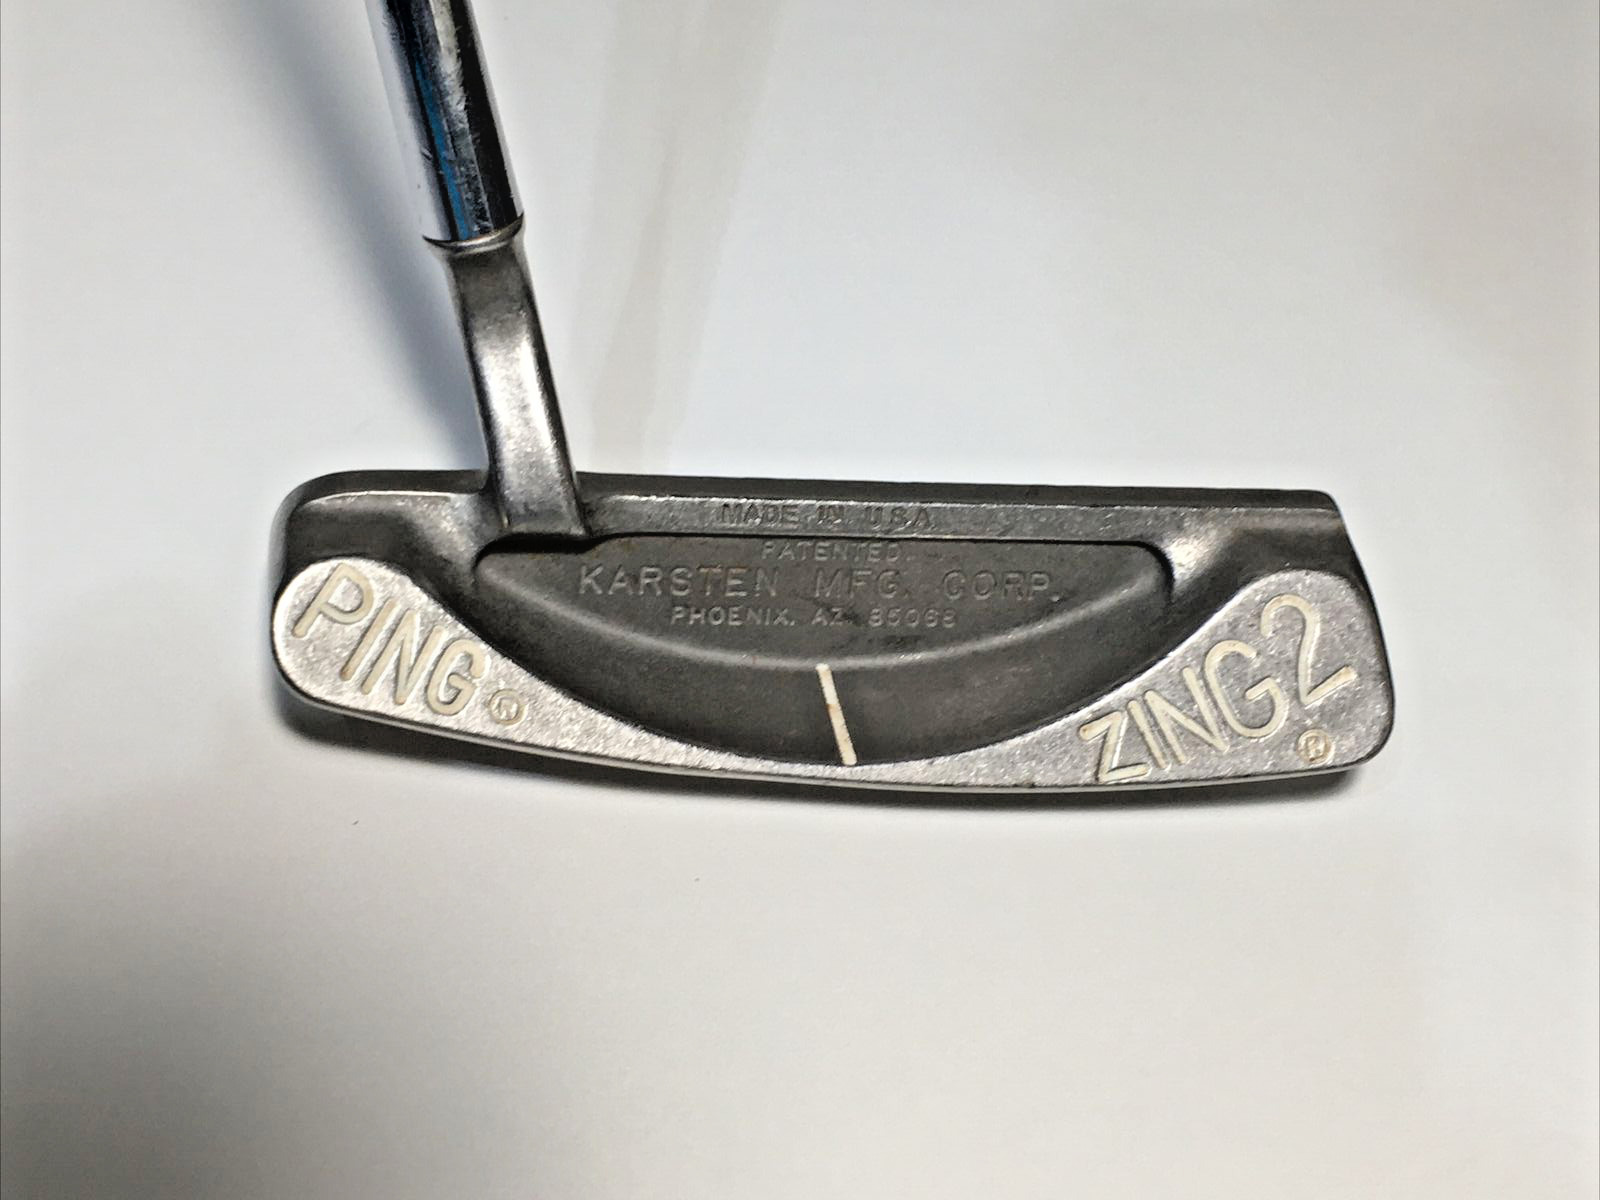 PING ZING 2 Karsten Putter RH 35.5”. See photos for condition.